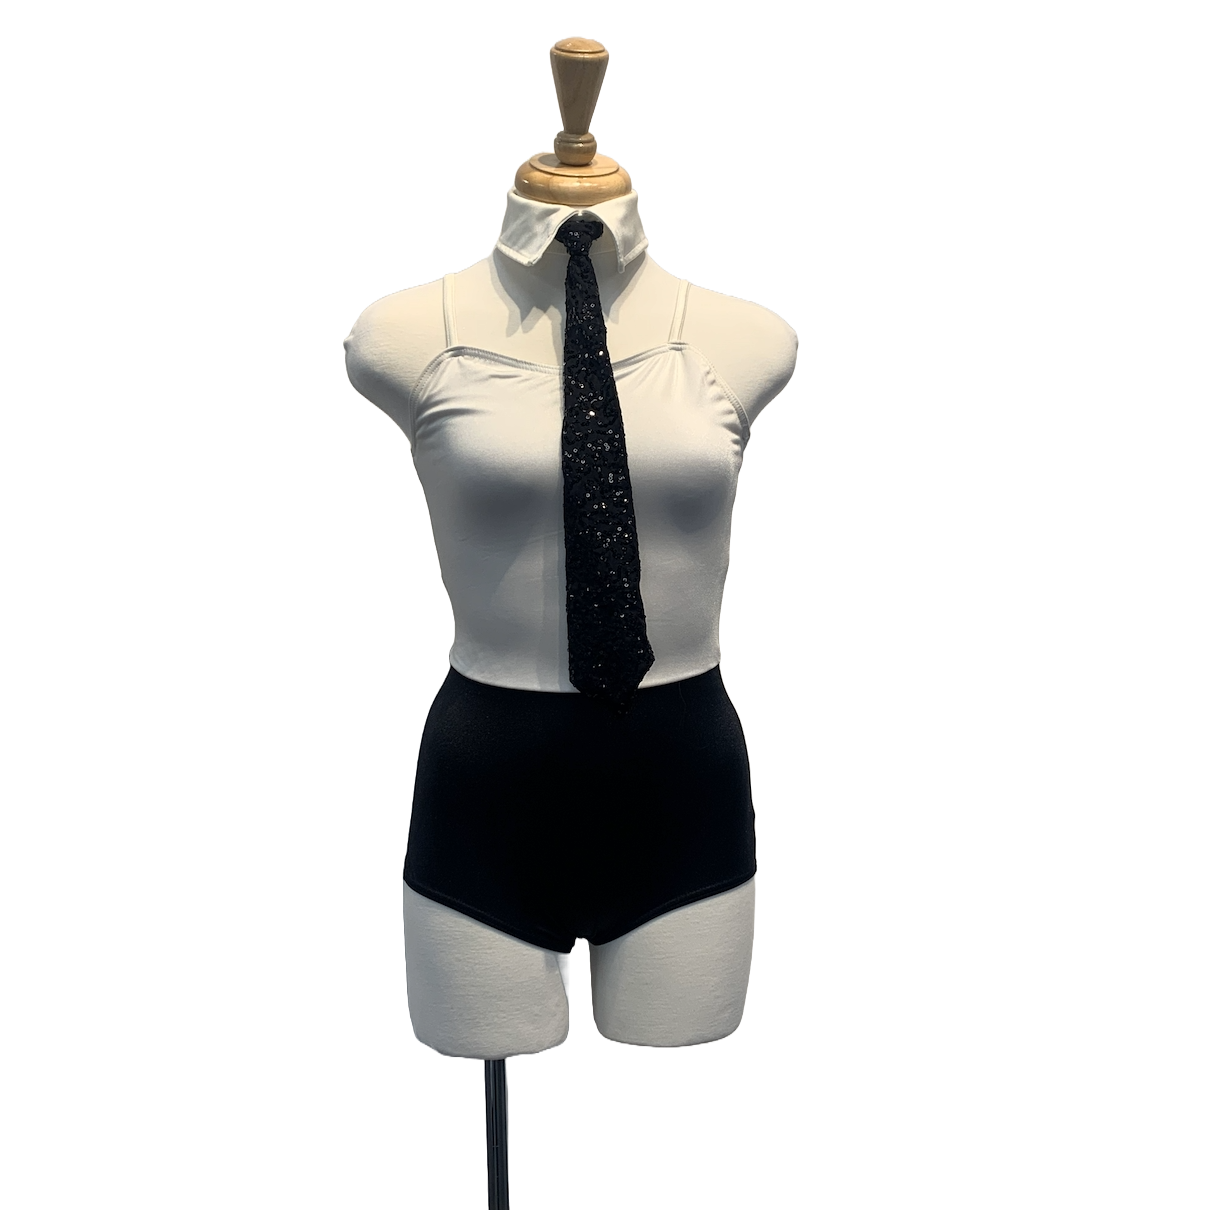 One piece black and white jazz/tap costume